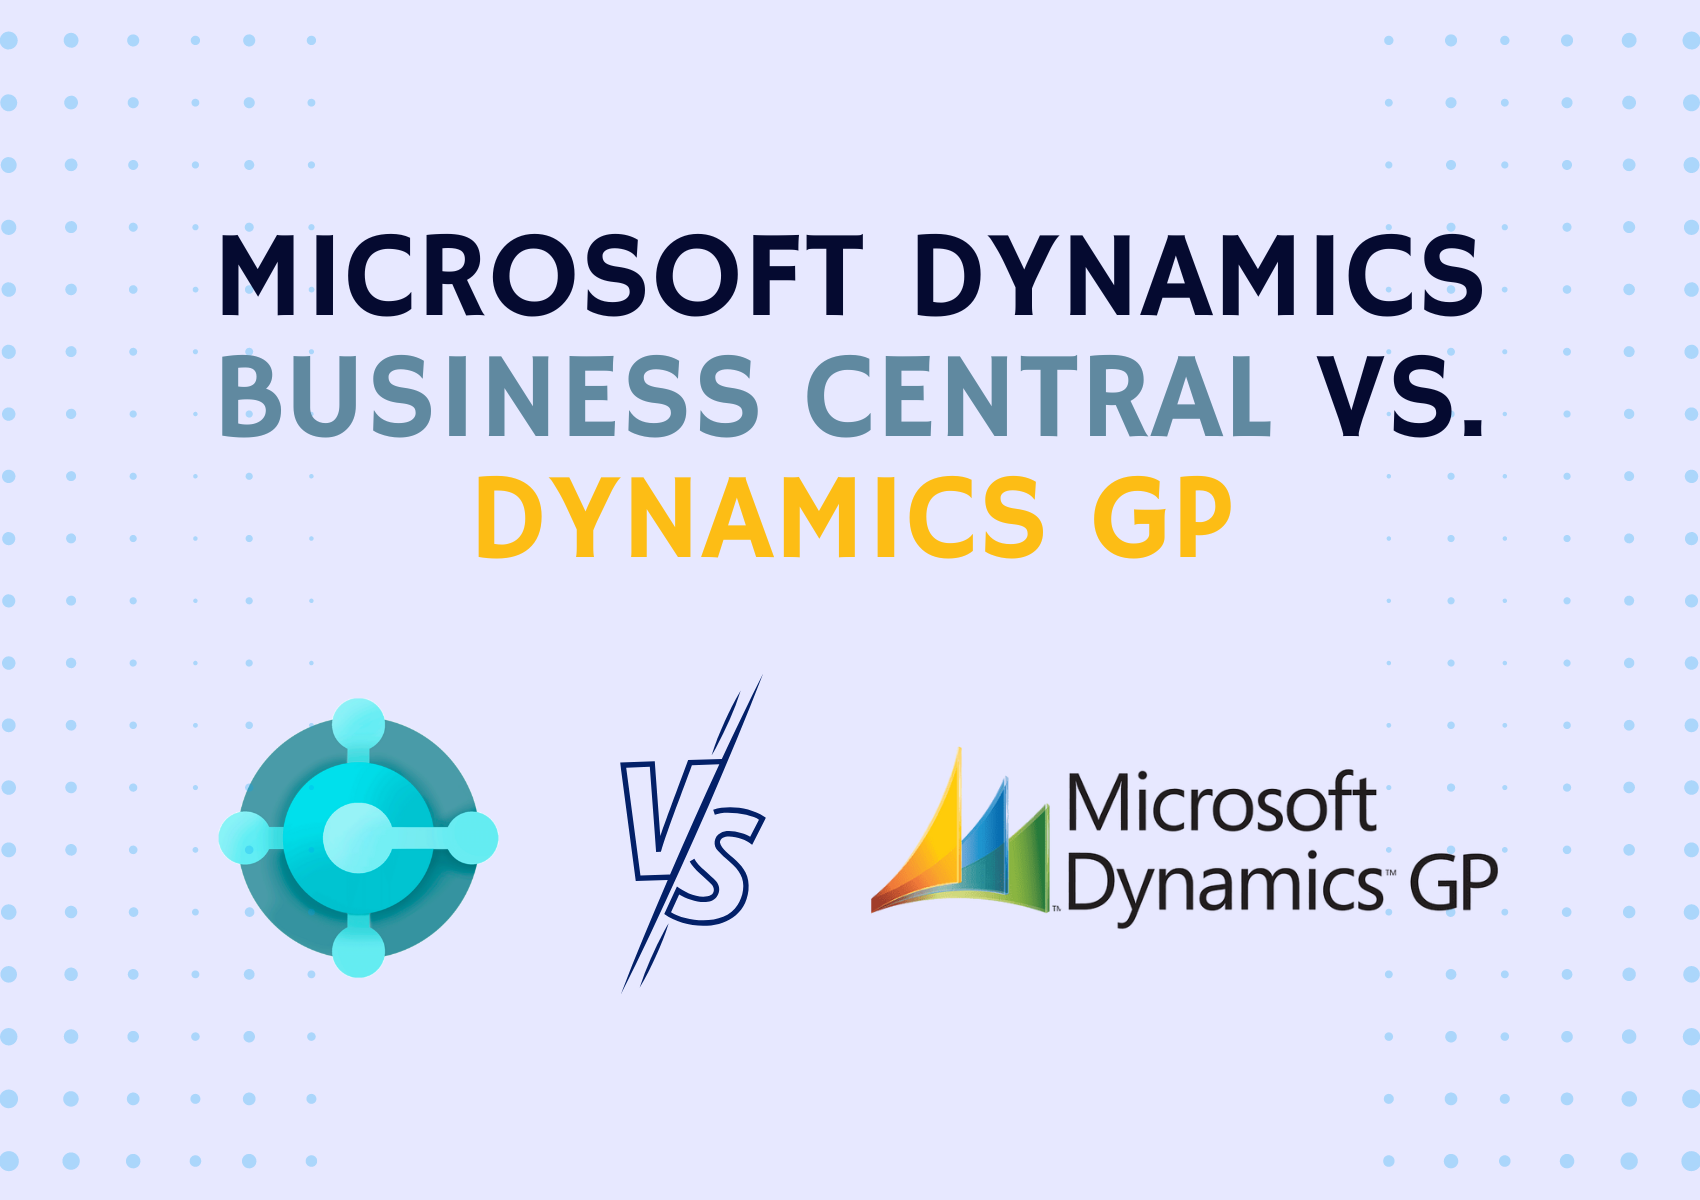 Microsoft Dynamics Business Central vs. Dynamics GP: Comparing Key Features